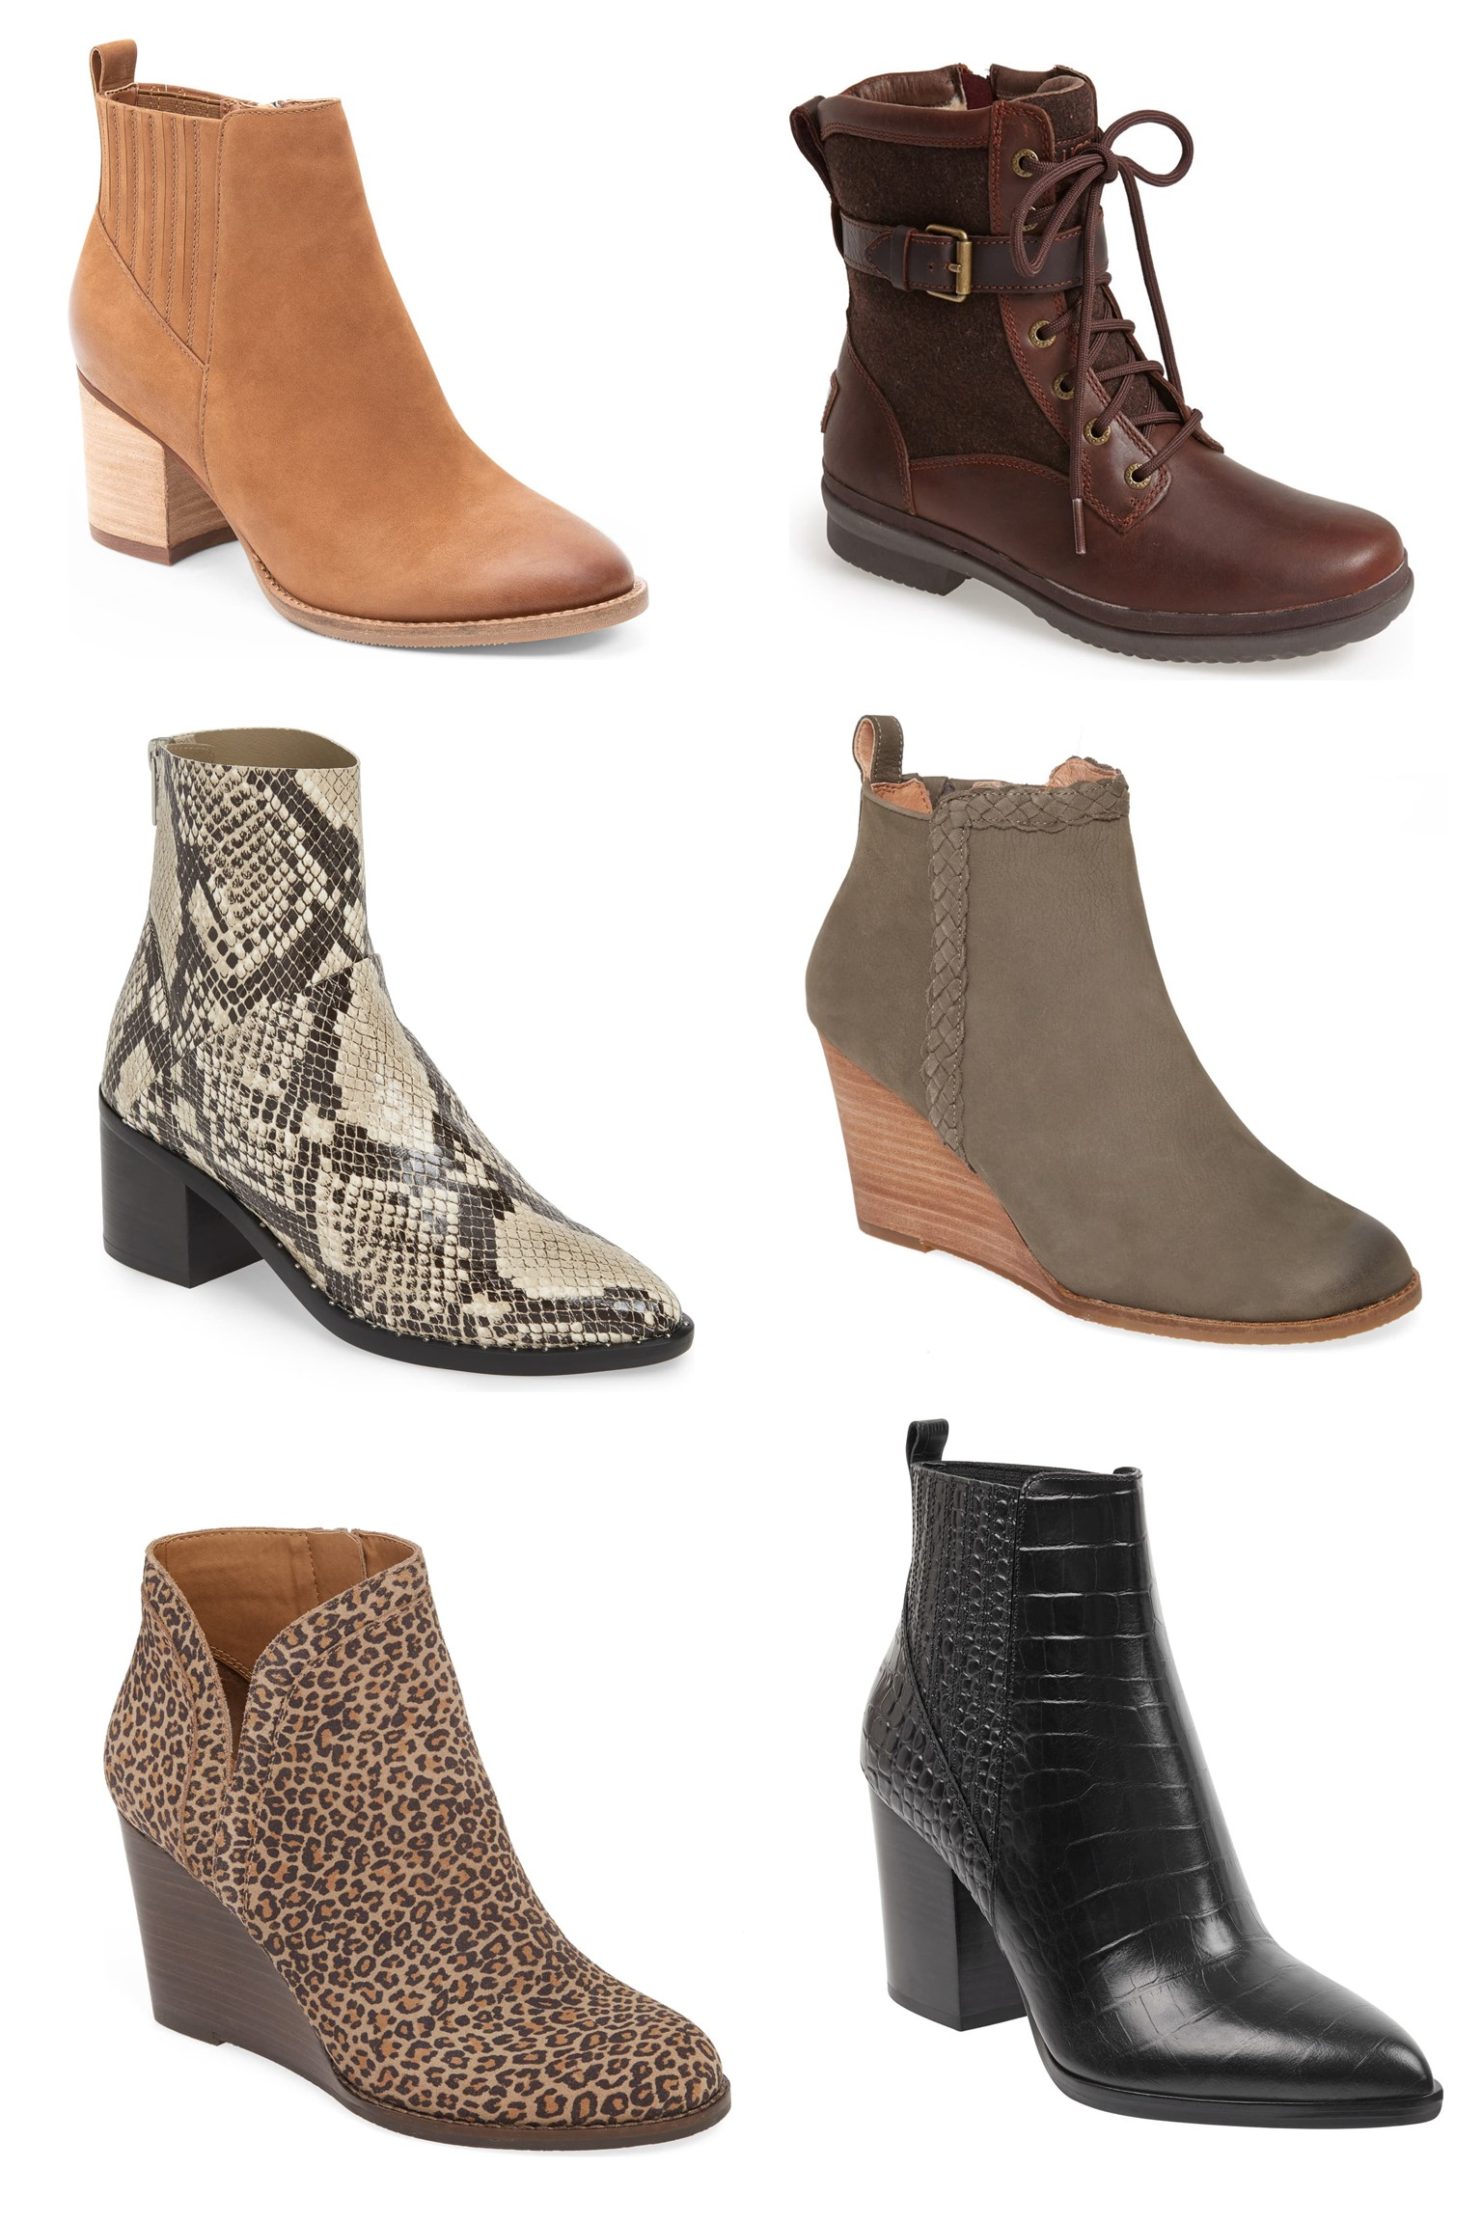 Fall Closet Staple - Booties - Dressed in Faith